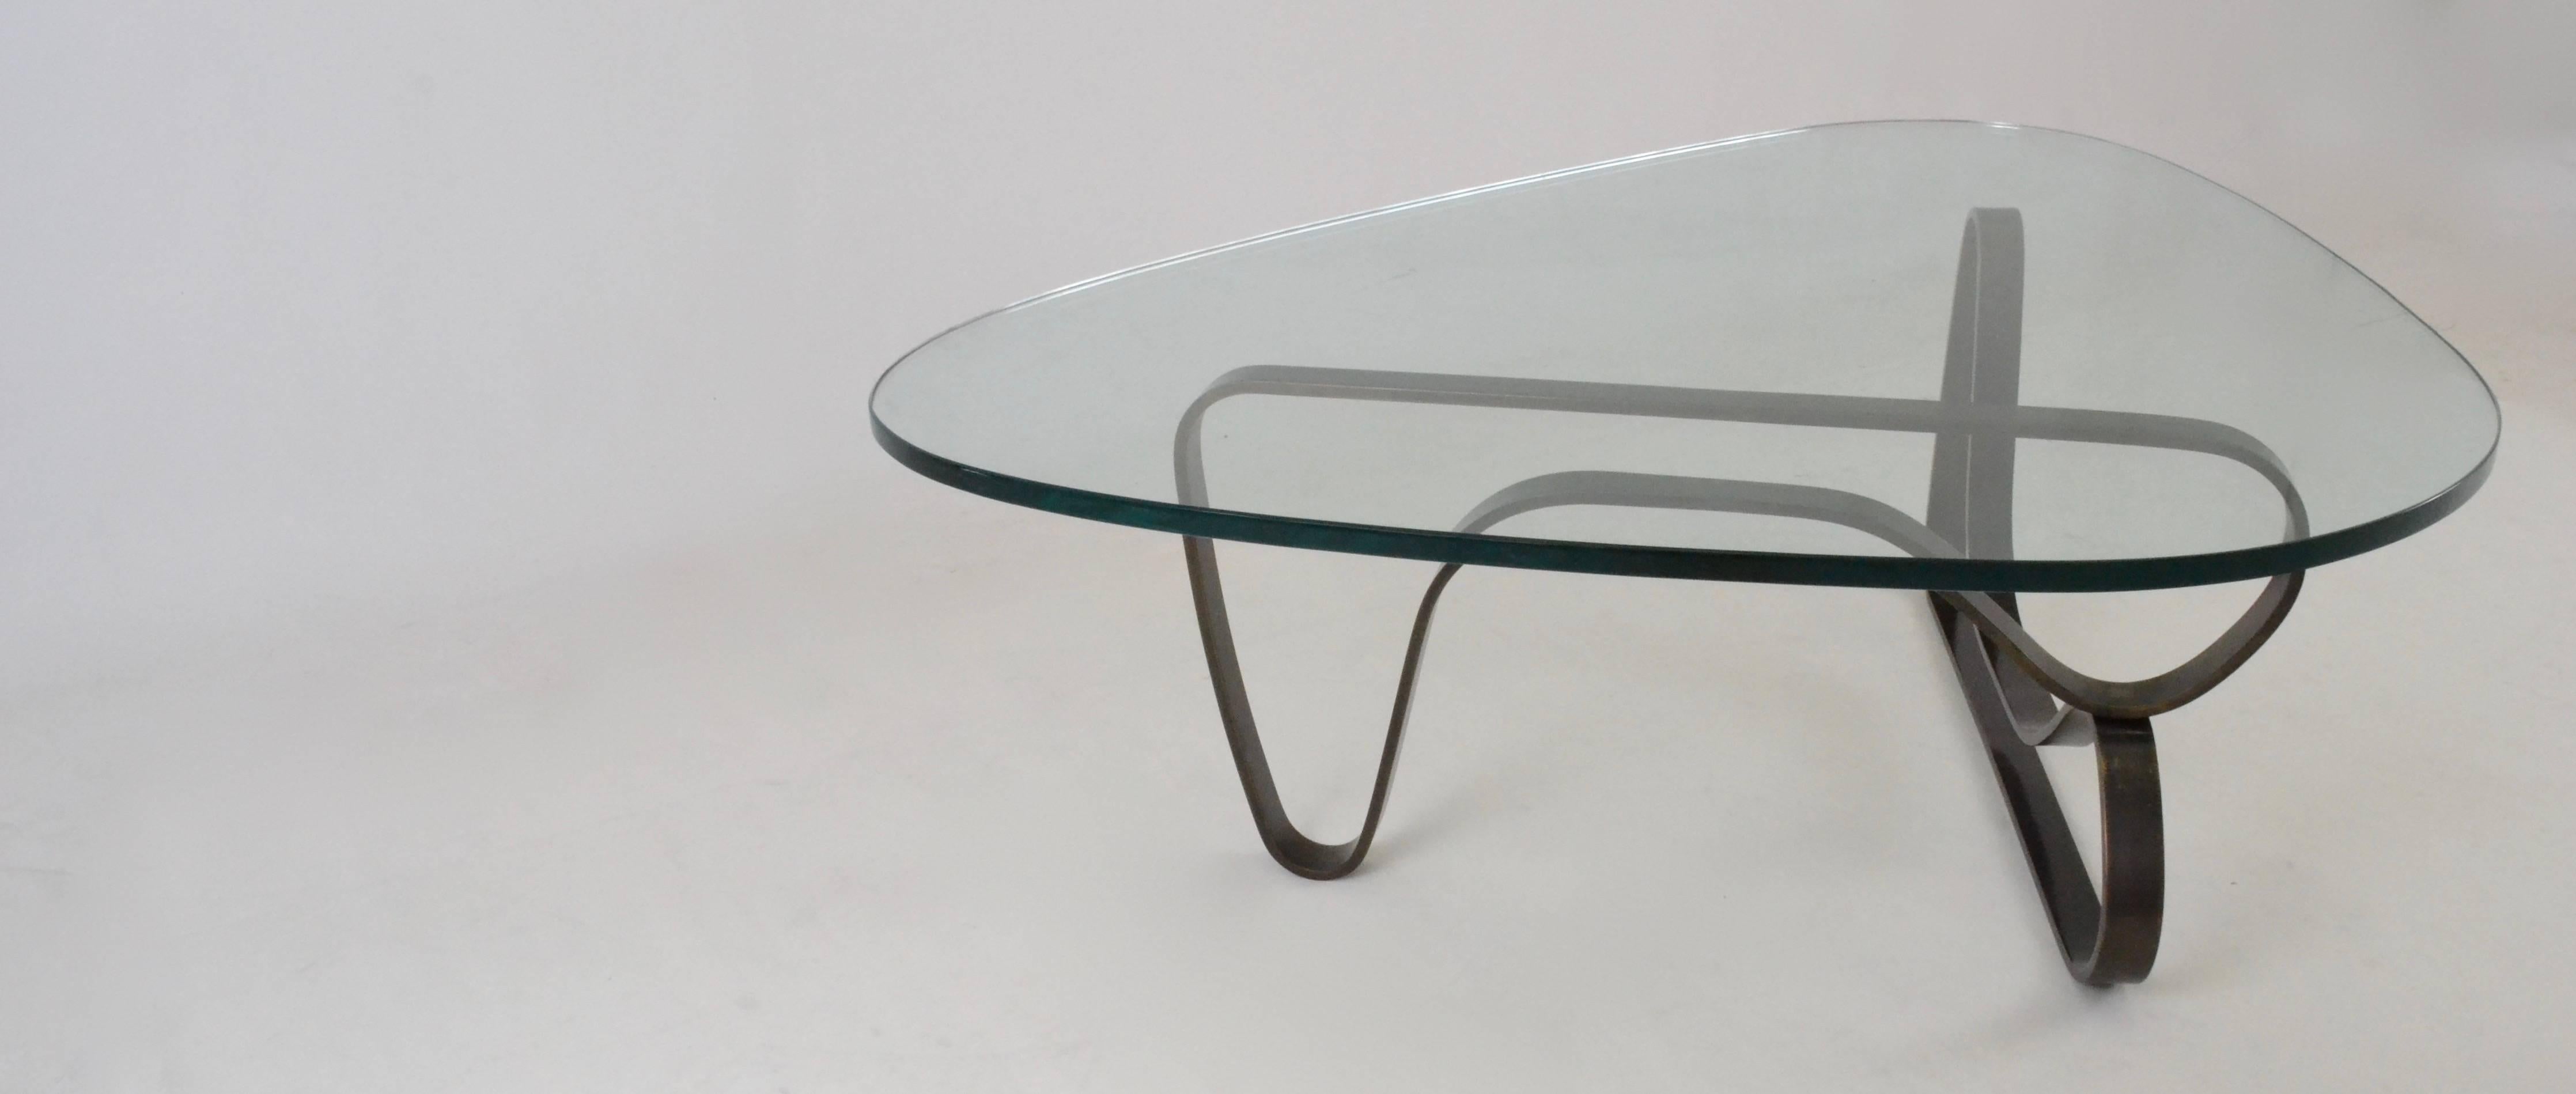 An exceptional cocktail table base-sculptural, biomorphic form in solid bronze. Measures: Original 3/4